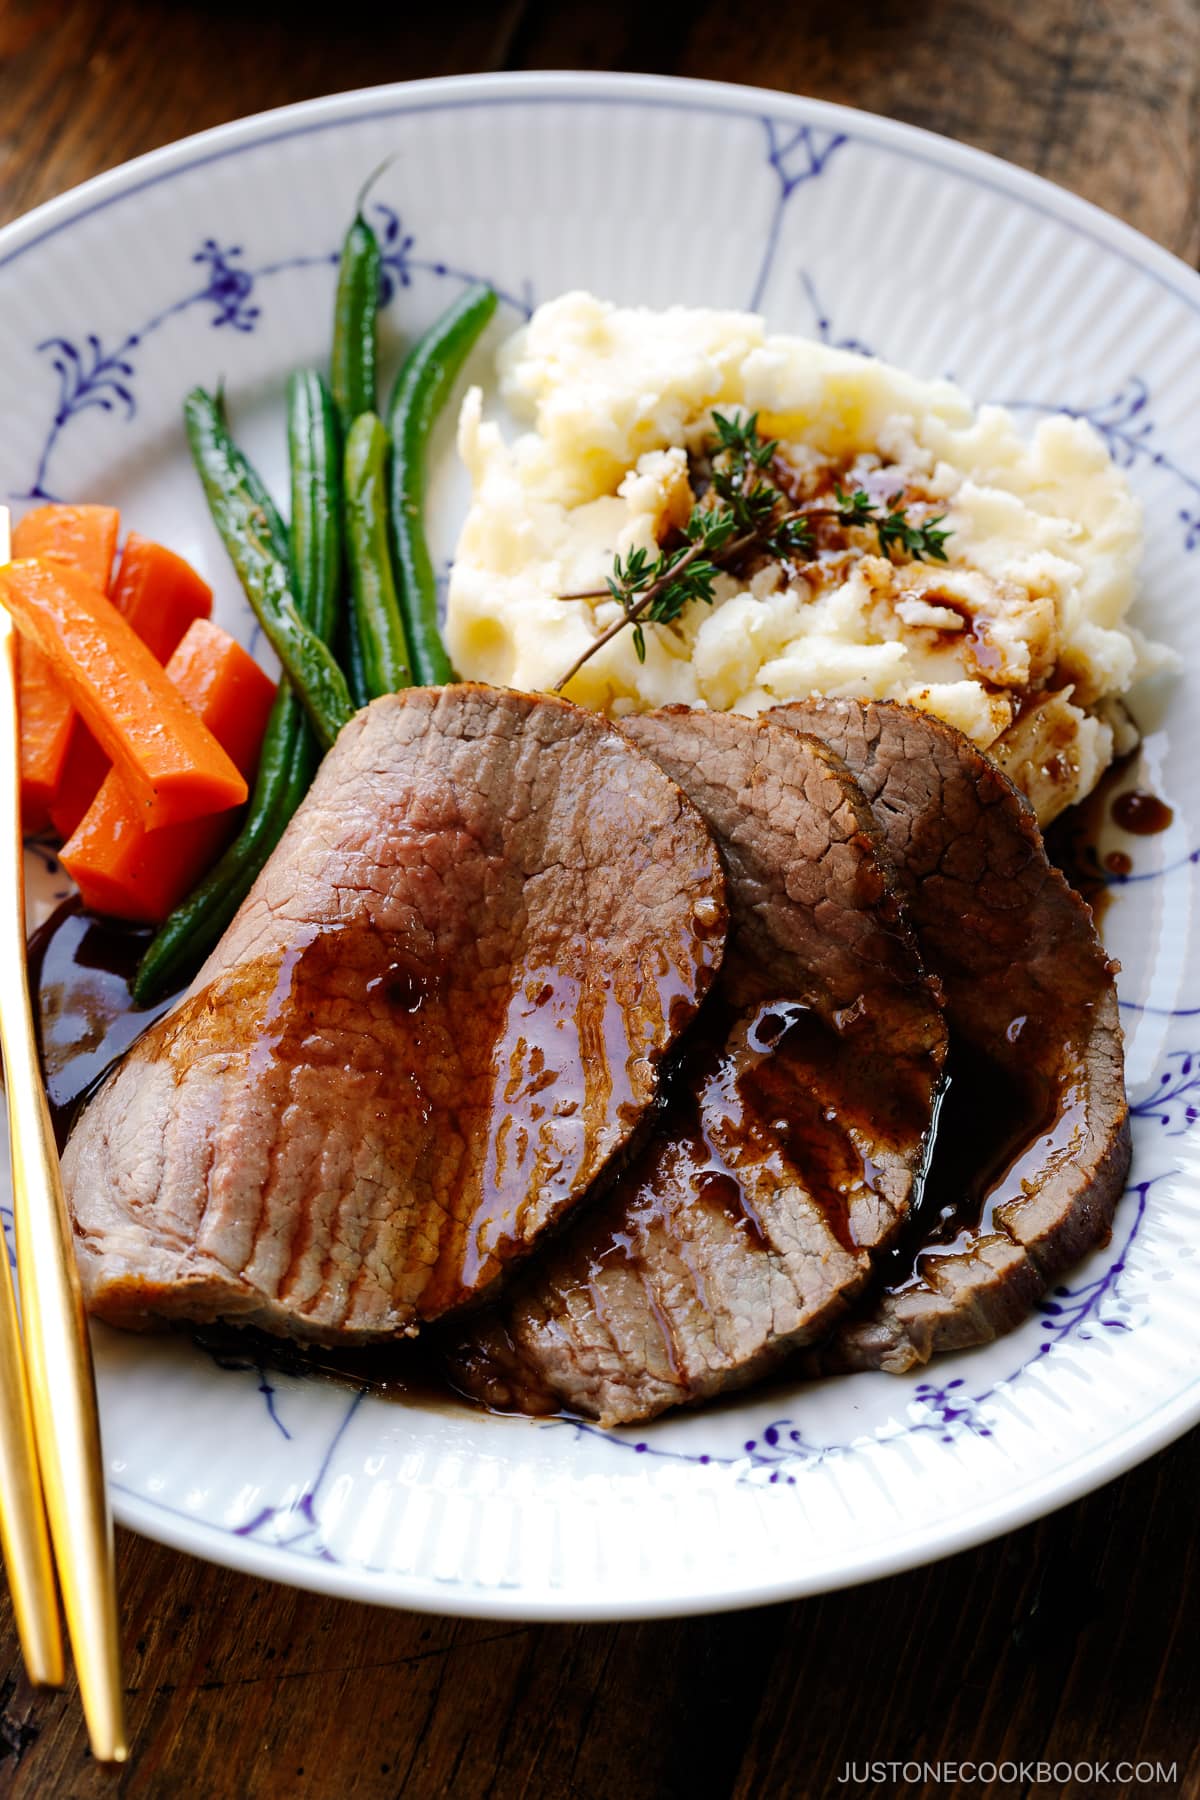 A white and blue plate containing roast beef with gravy, mashed potatoes, green beans, and carrot.